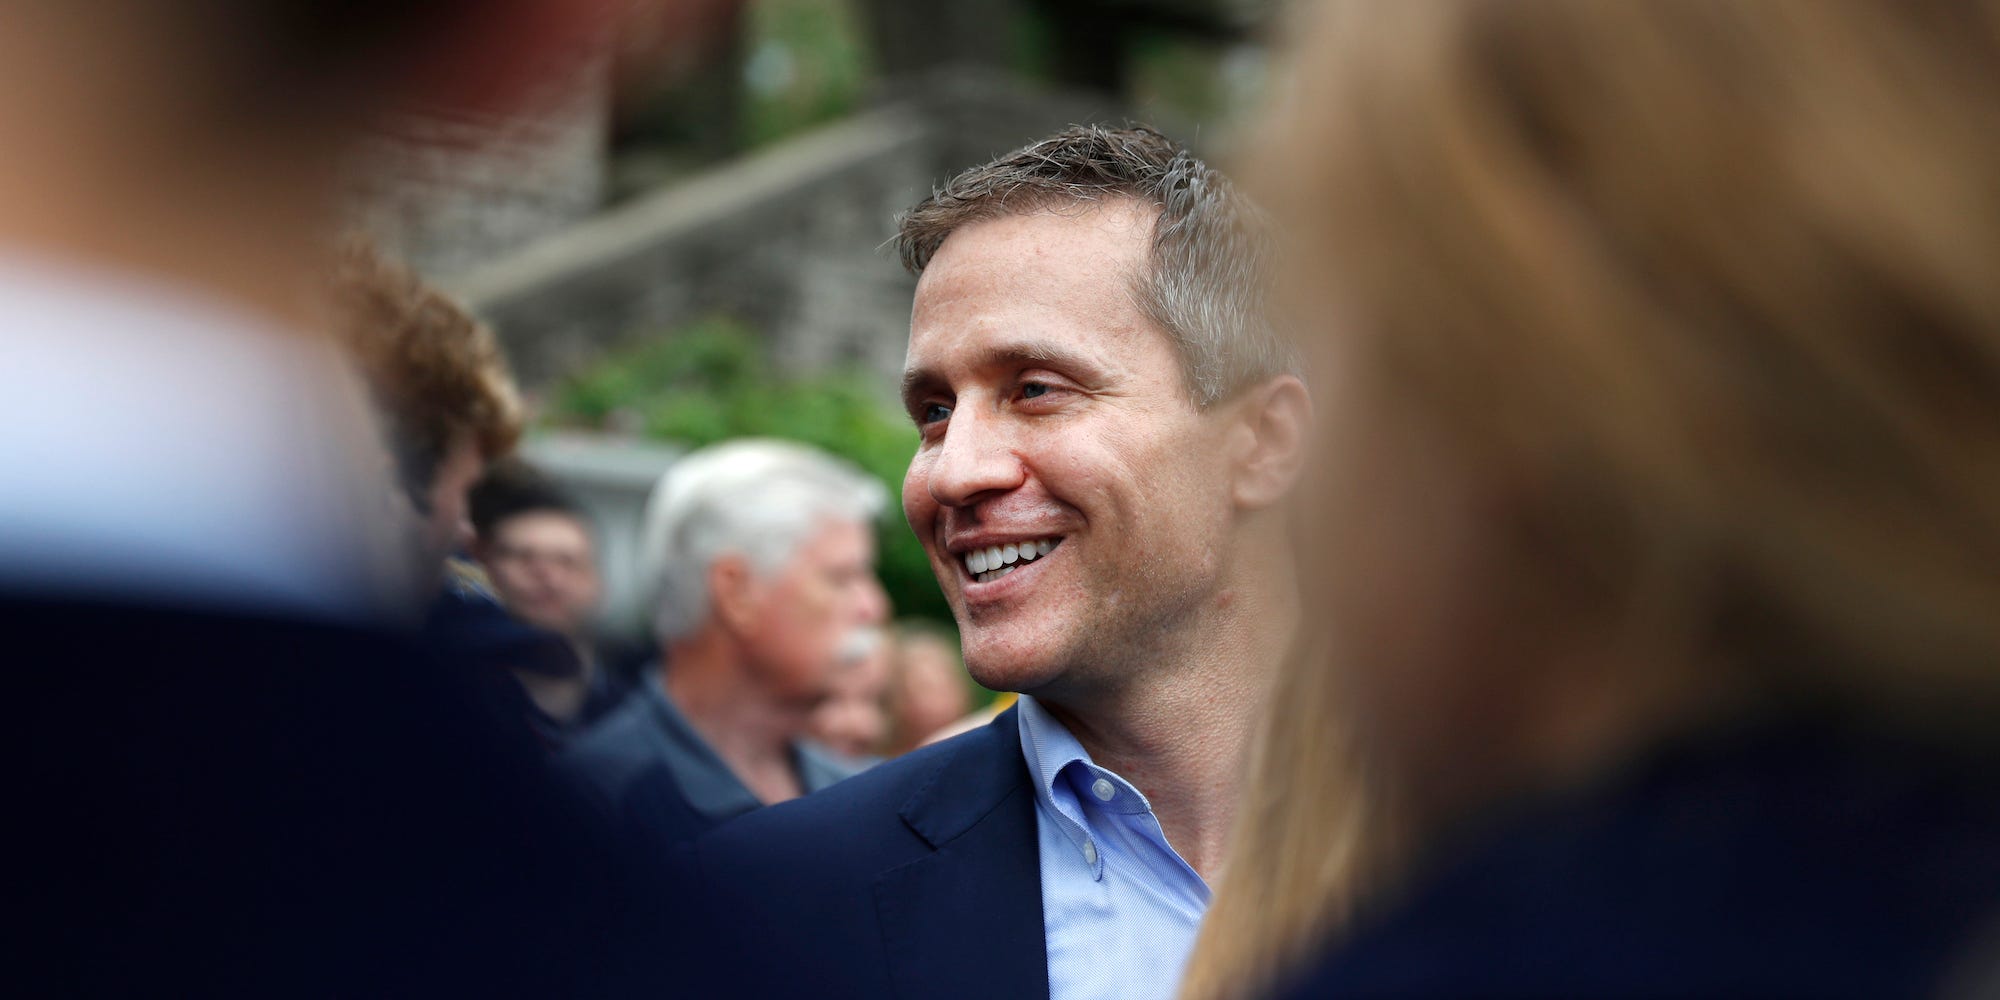 Former Gov. Eric Greitens after announcing the release of funds for the state's biodiesel program on May 17, 2018 in Jefferson City, MO.